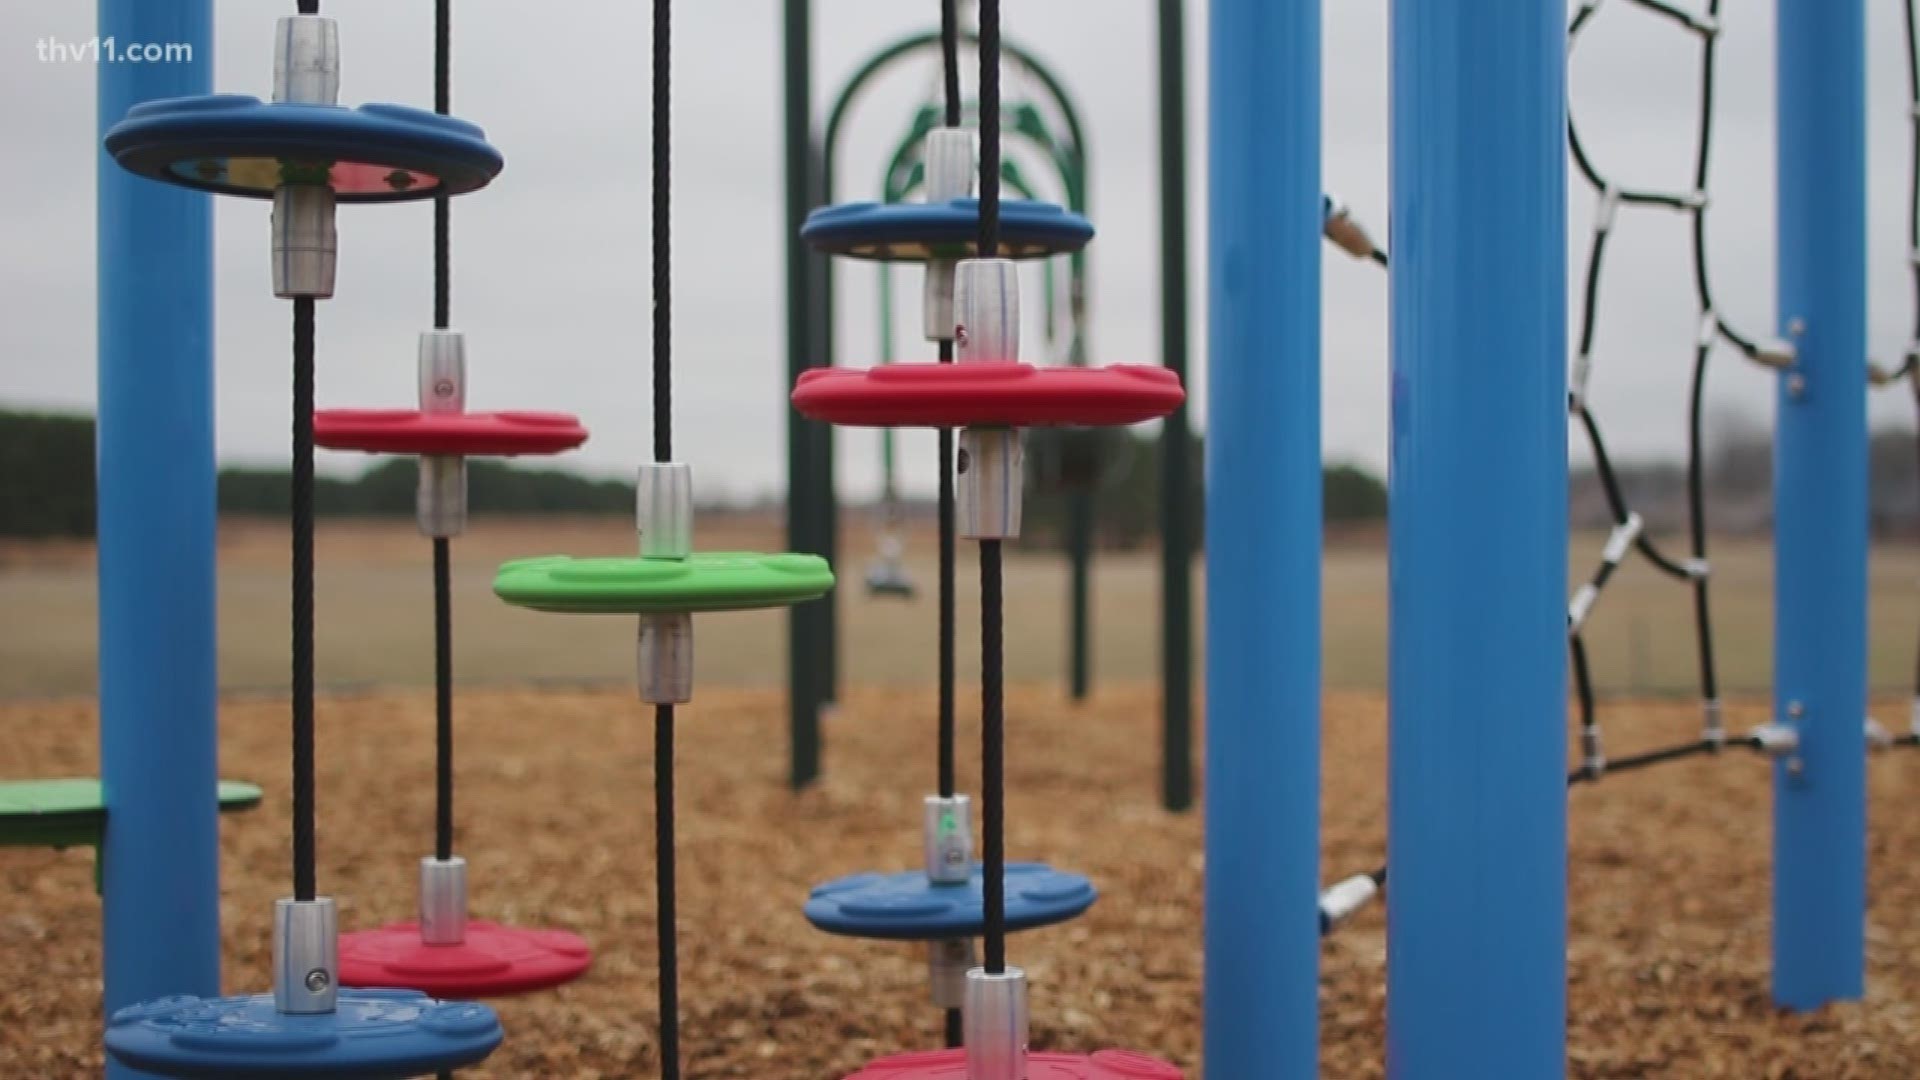 North Little Rock will soon see two new public playgrounds in their area.